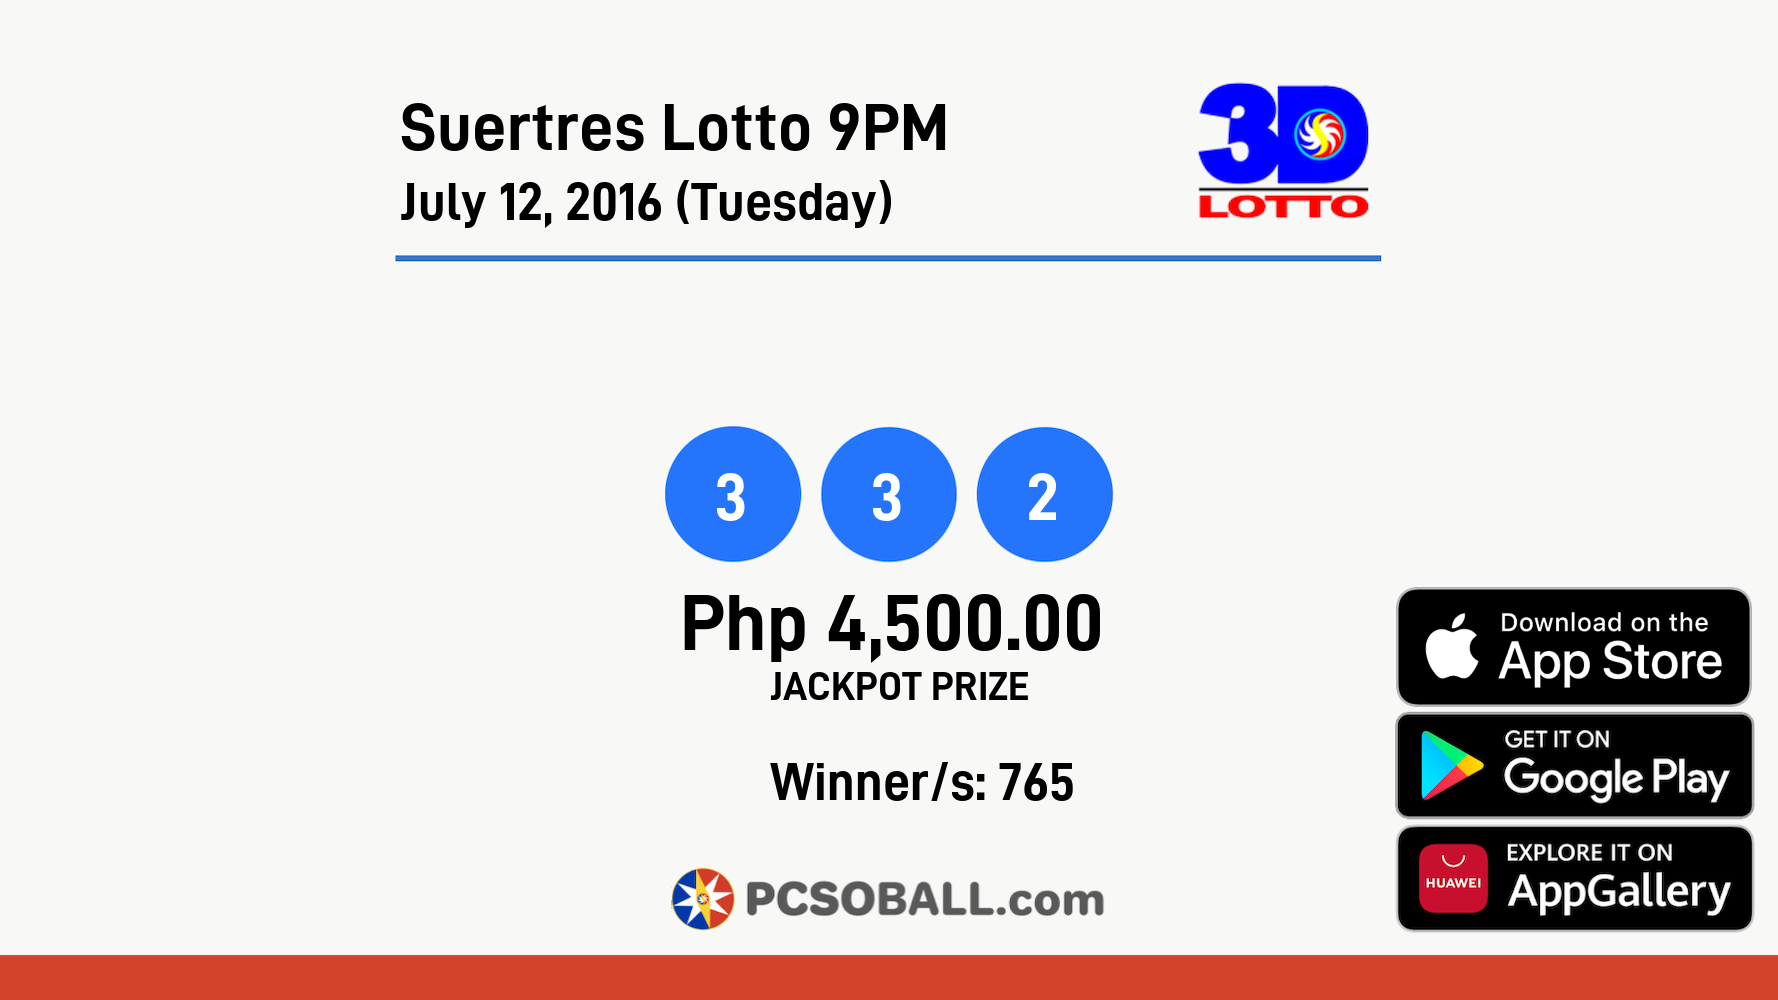 Suertres Lotto 9PM July 12, 2016 (Tuesday) Result